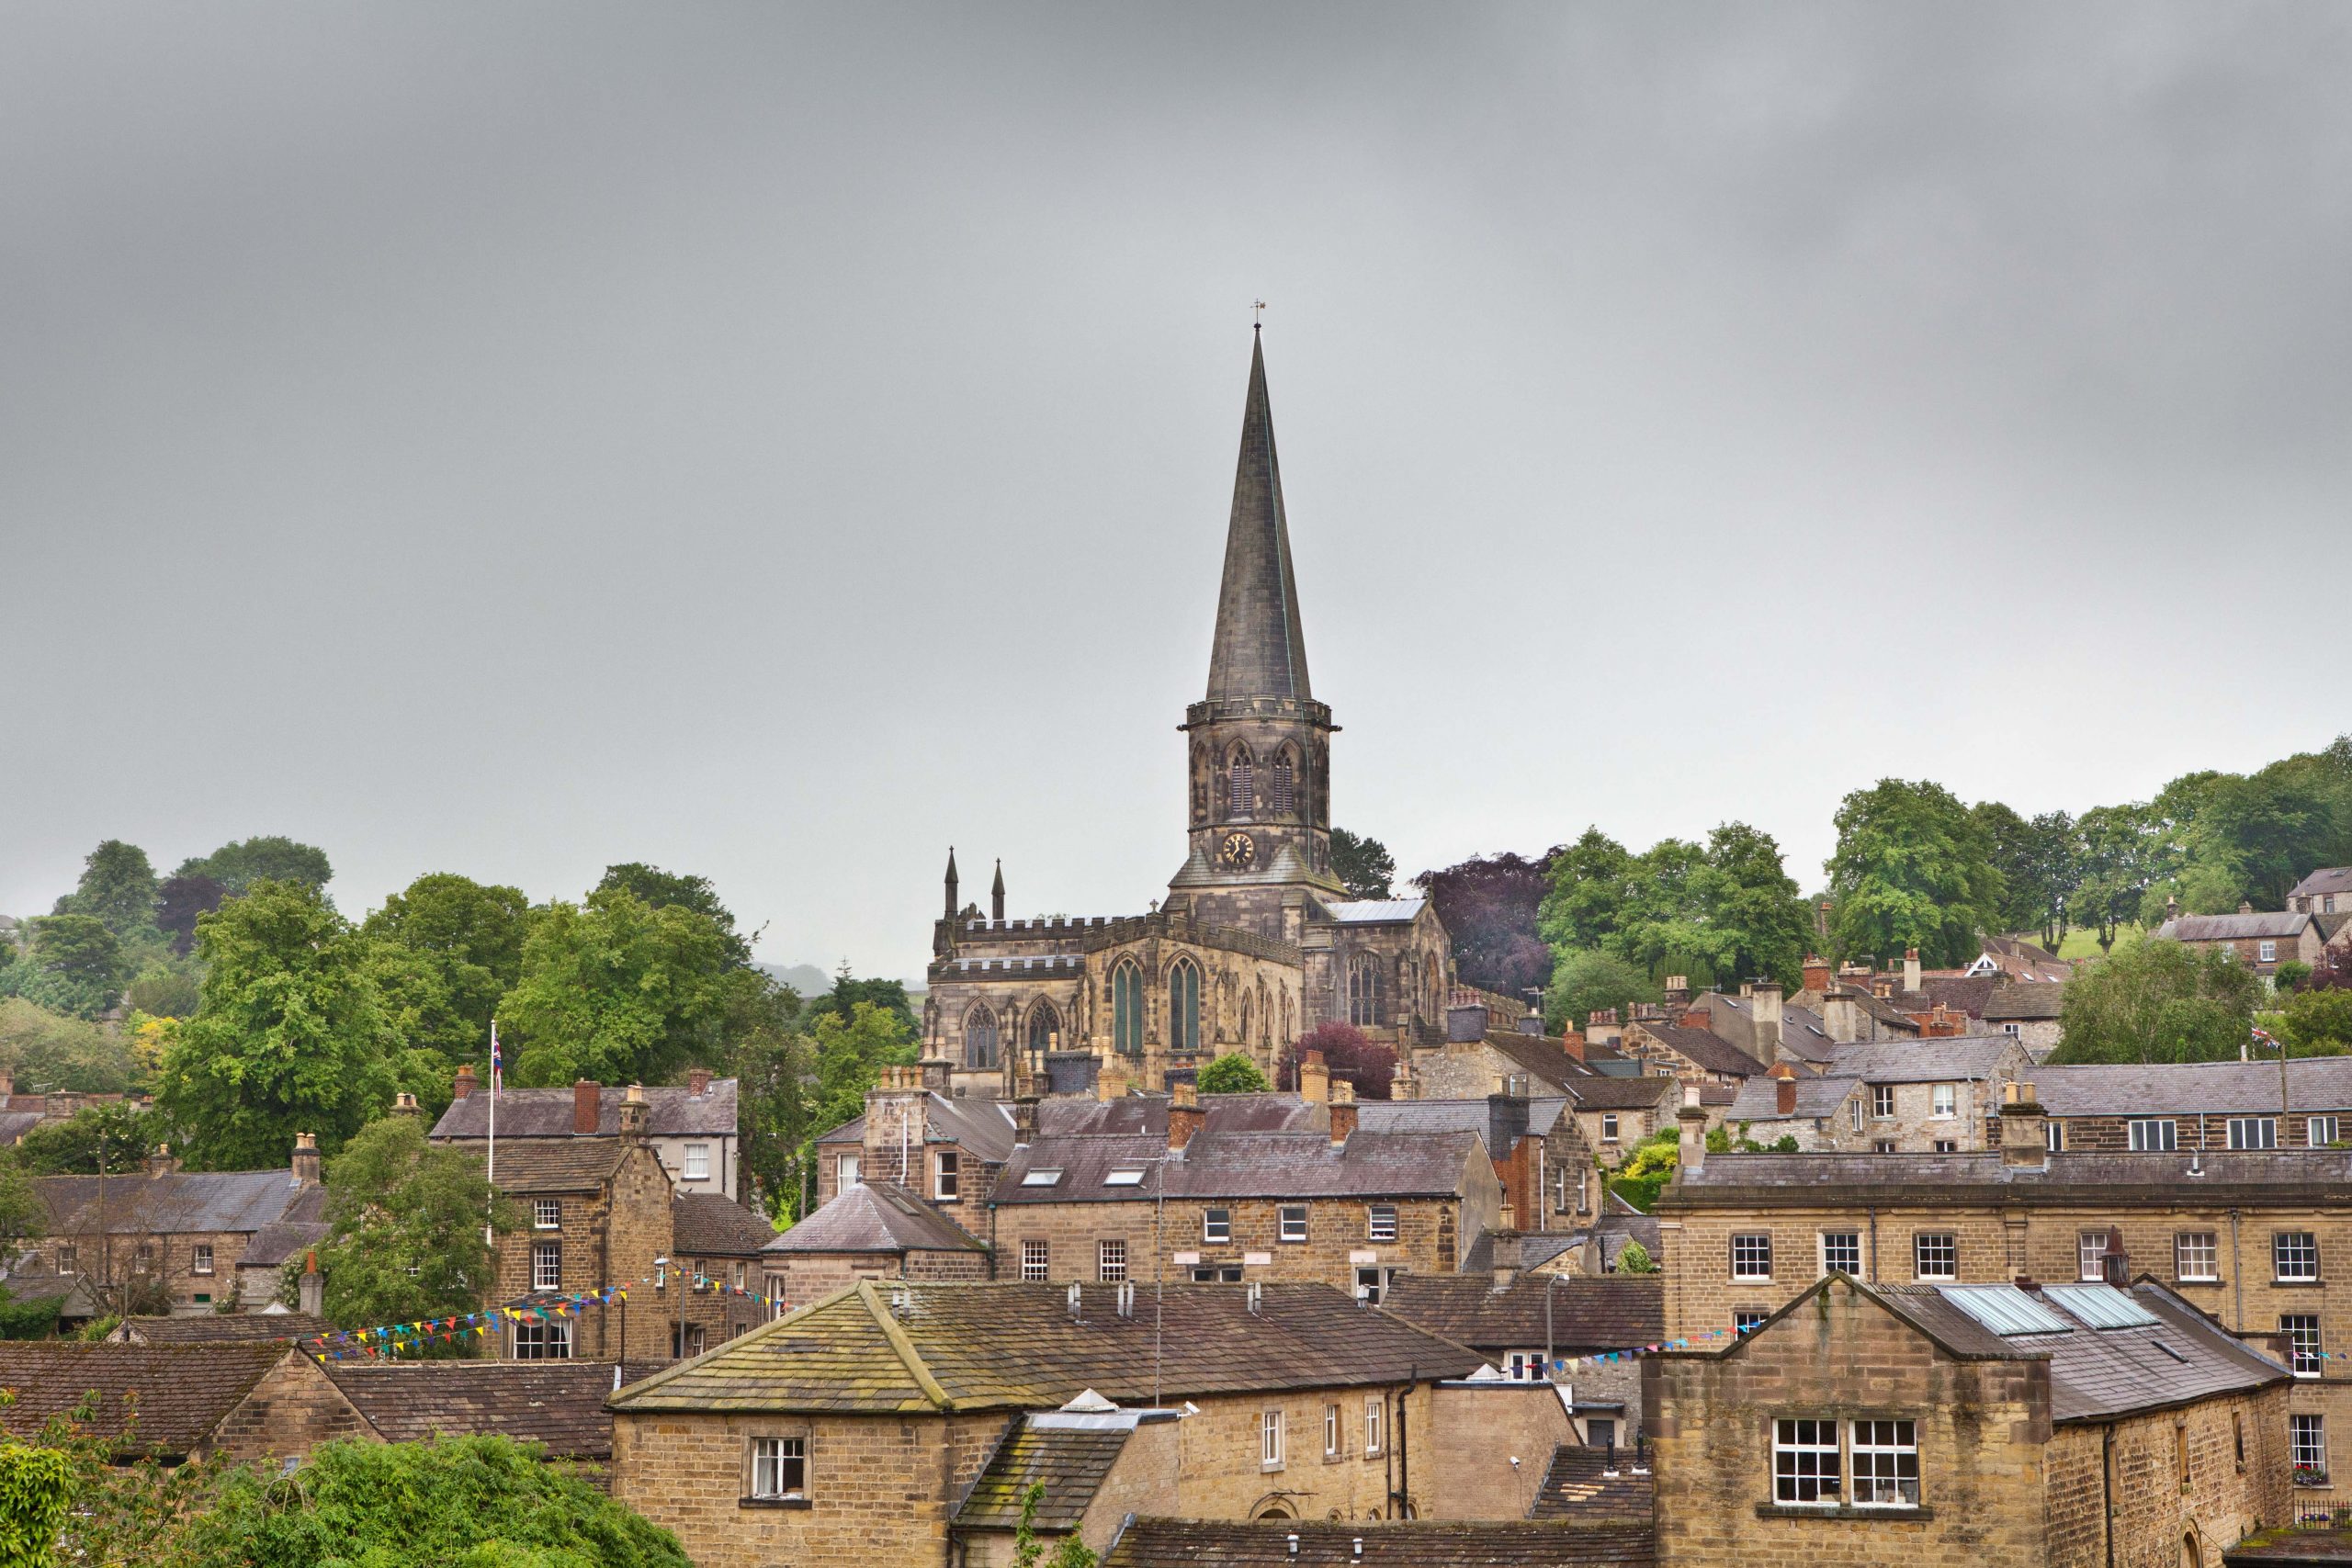 Bakewell's famous view of the church